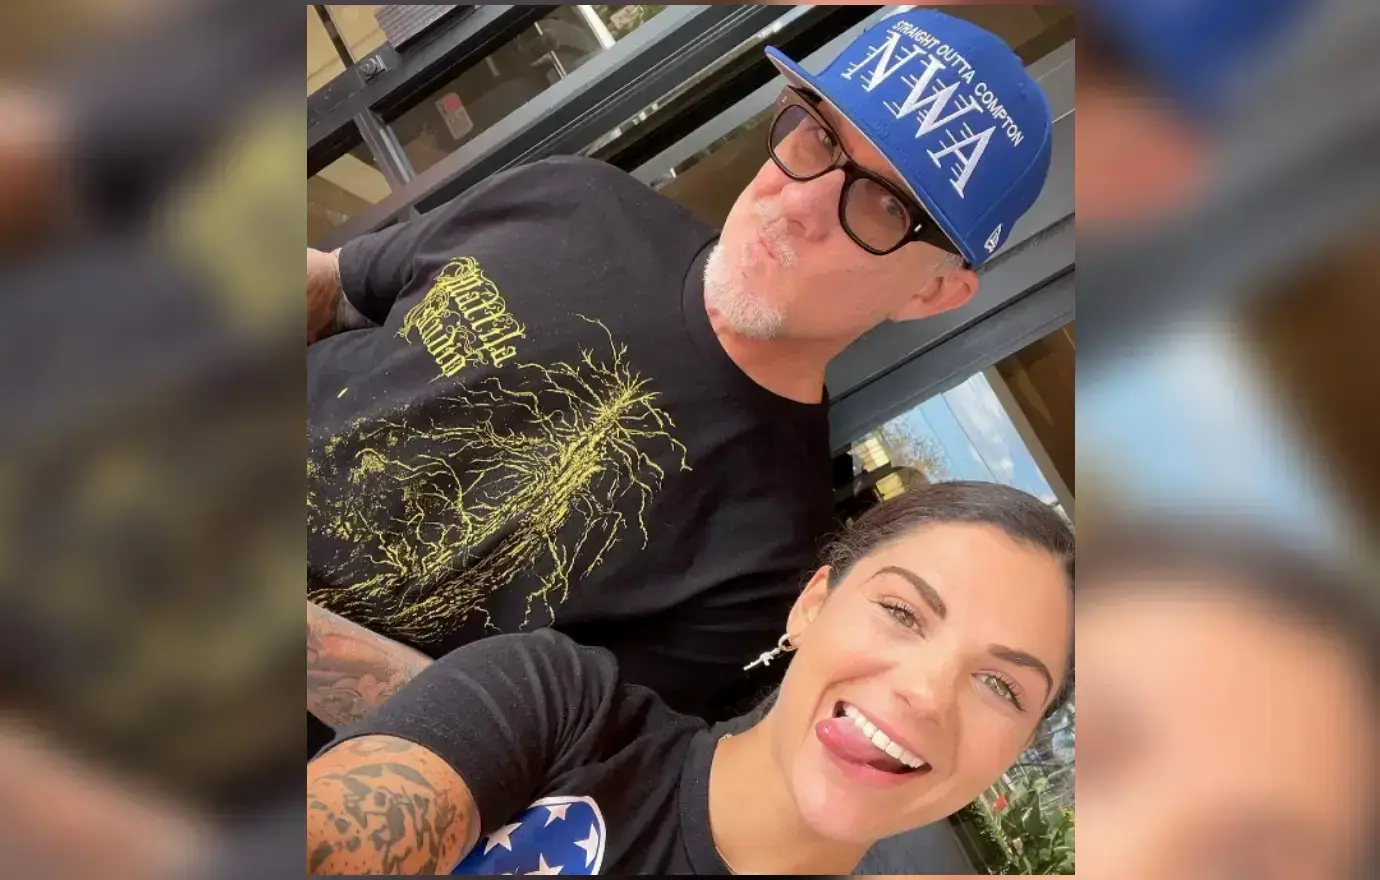 Jesse James and Pregnant Wife Bonnie Rotten Back Together For Christmas Fiesta pic